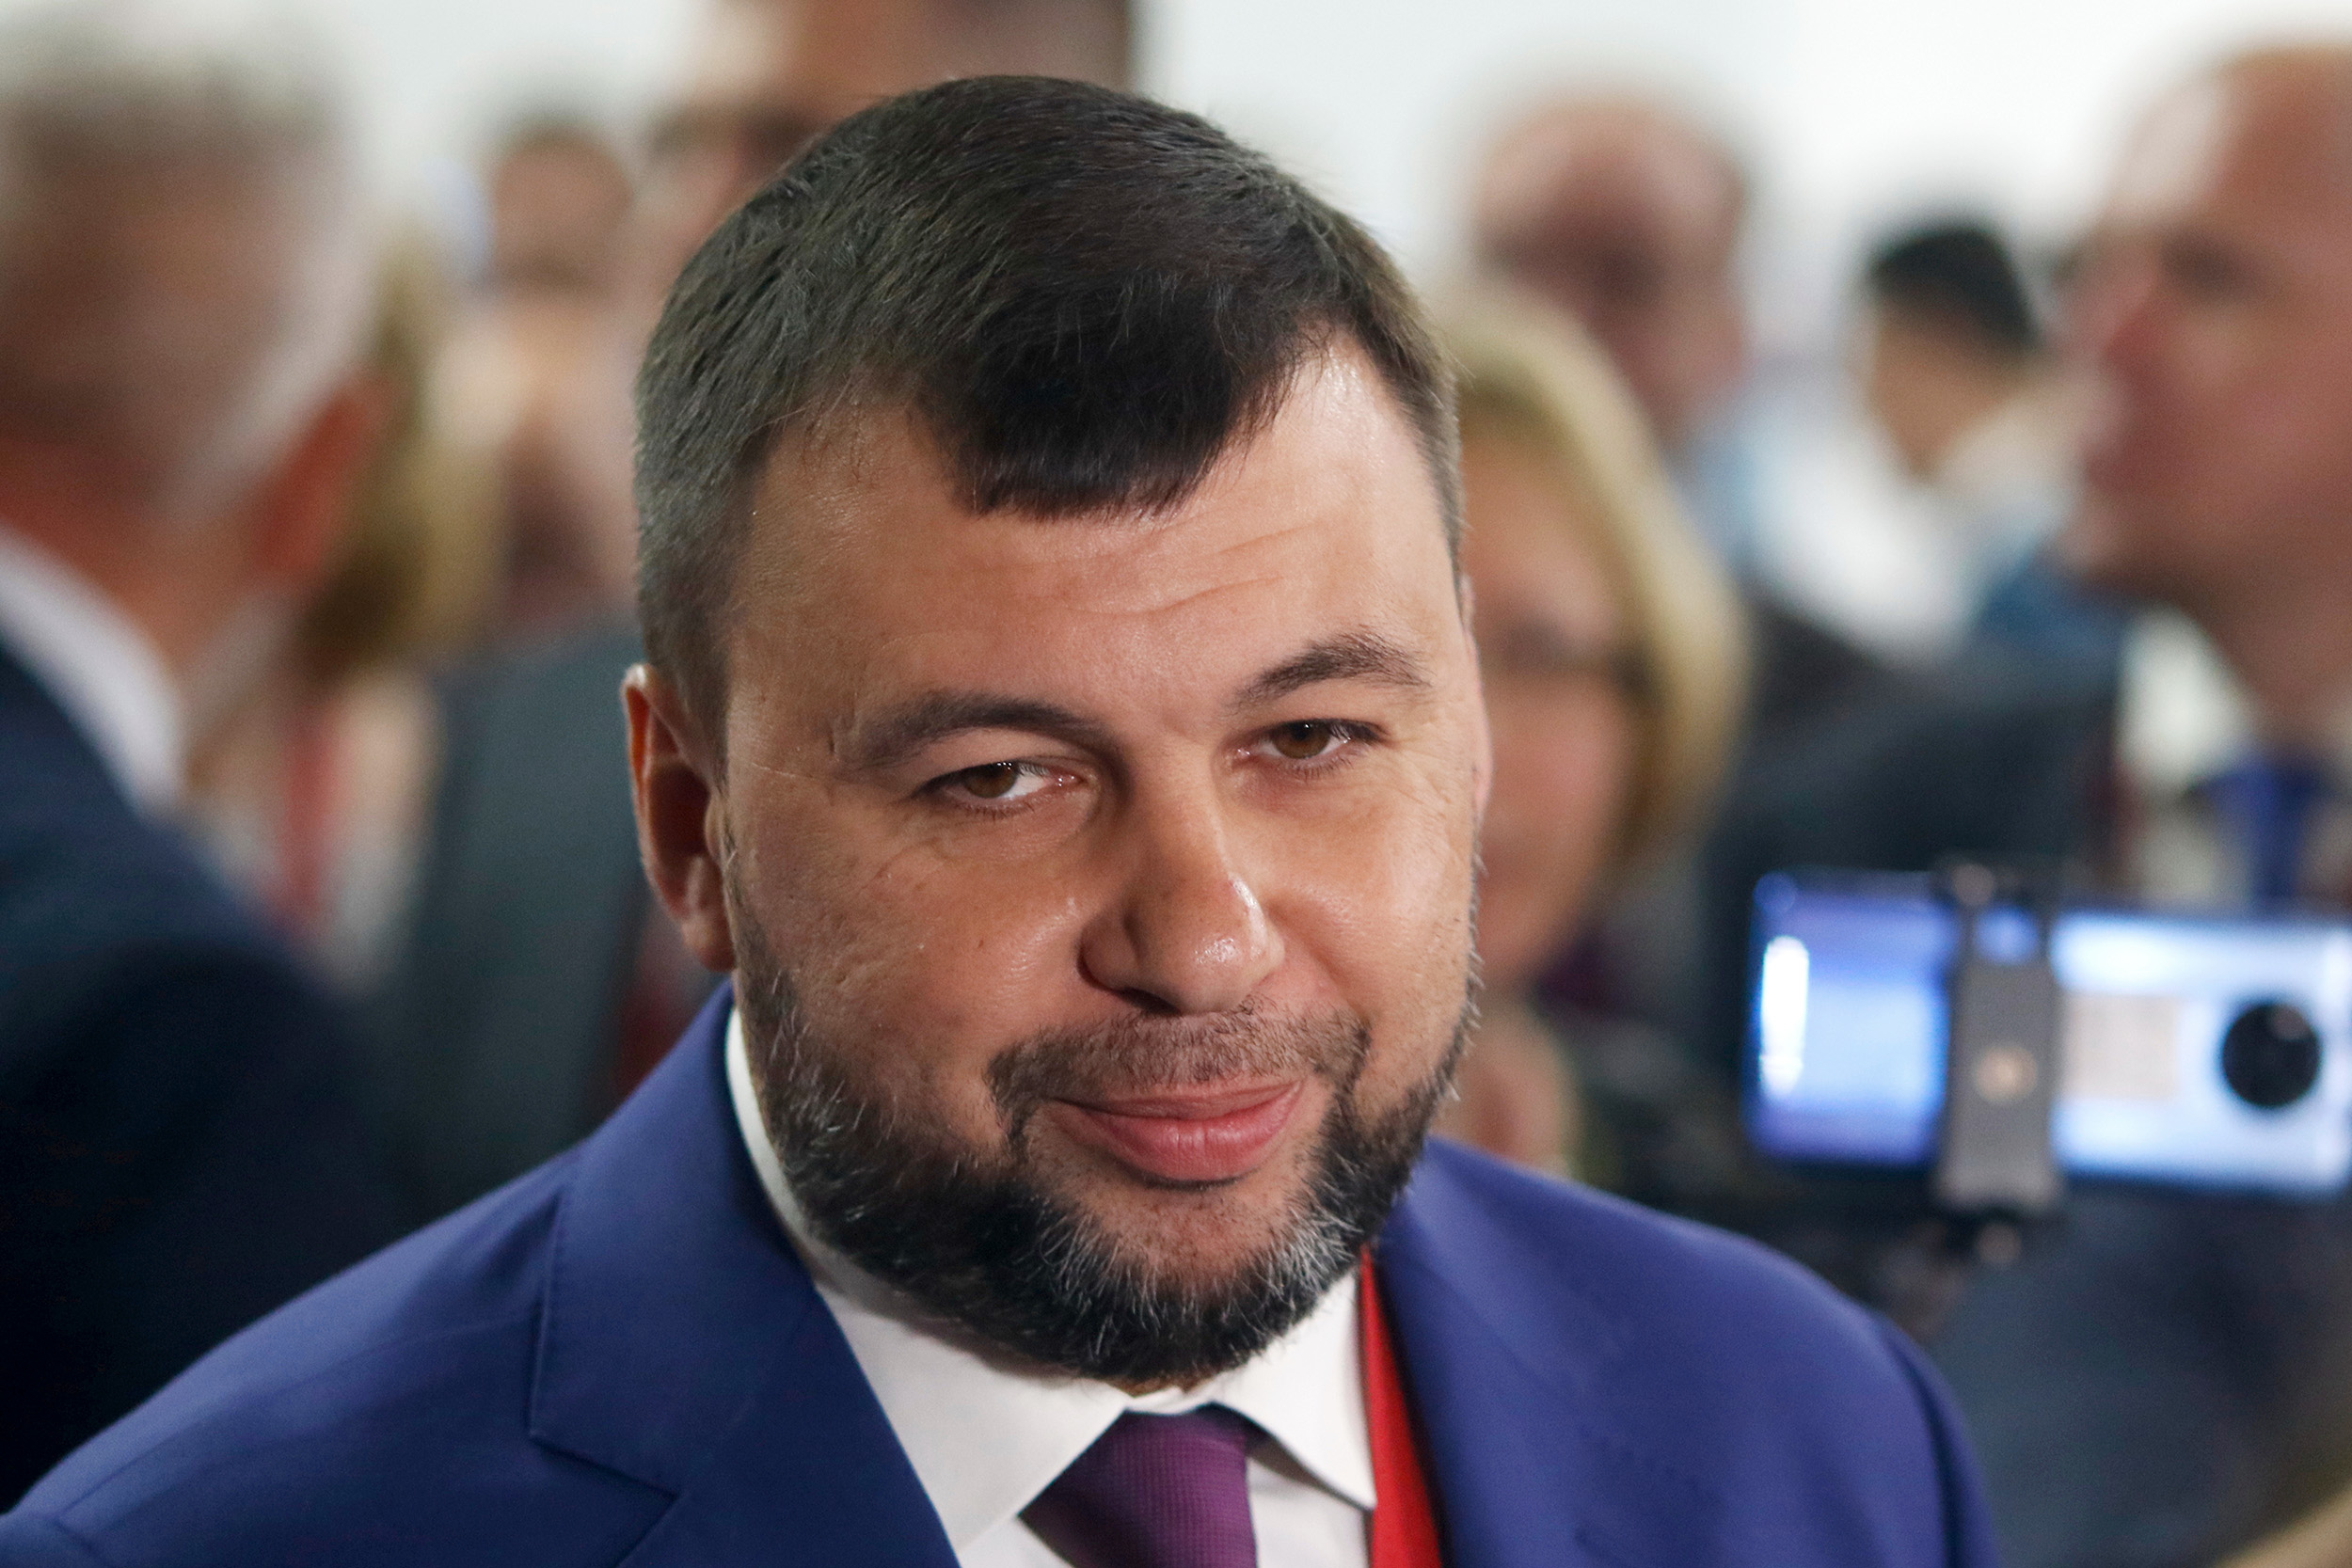 Denis Pushilin, Head of the Donetsk People's Republic, DNR, during a press conference at the St. Petersburg International Economic Forum 2022 on June 16, 2022.